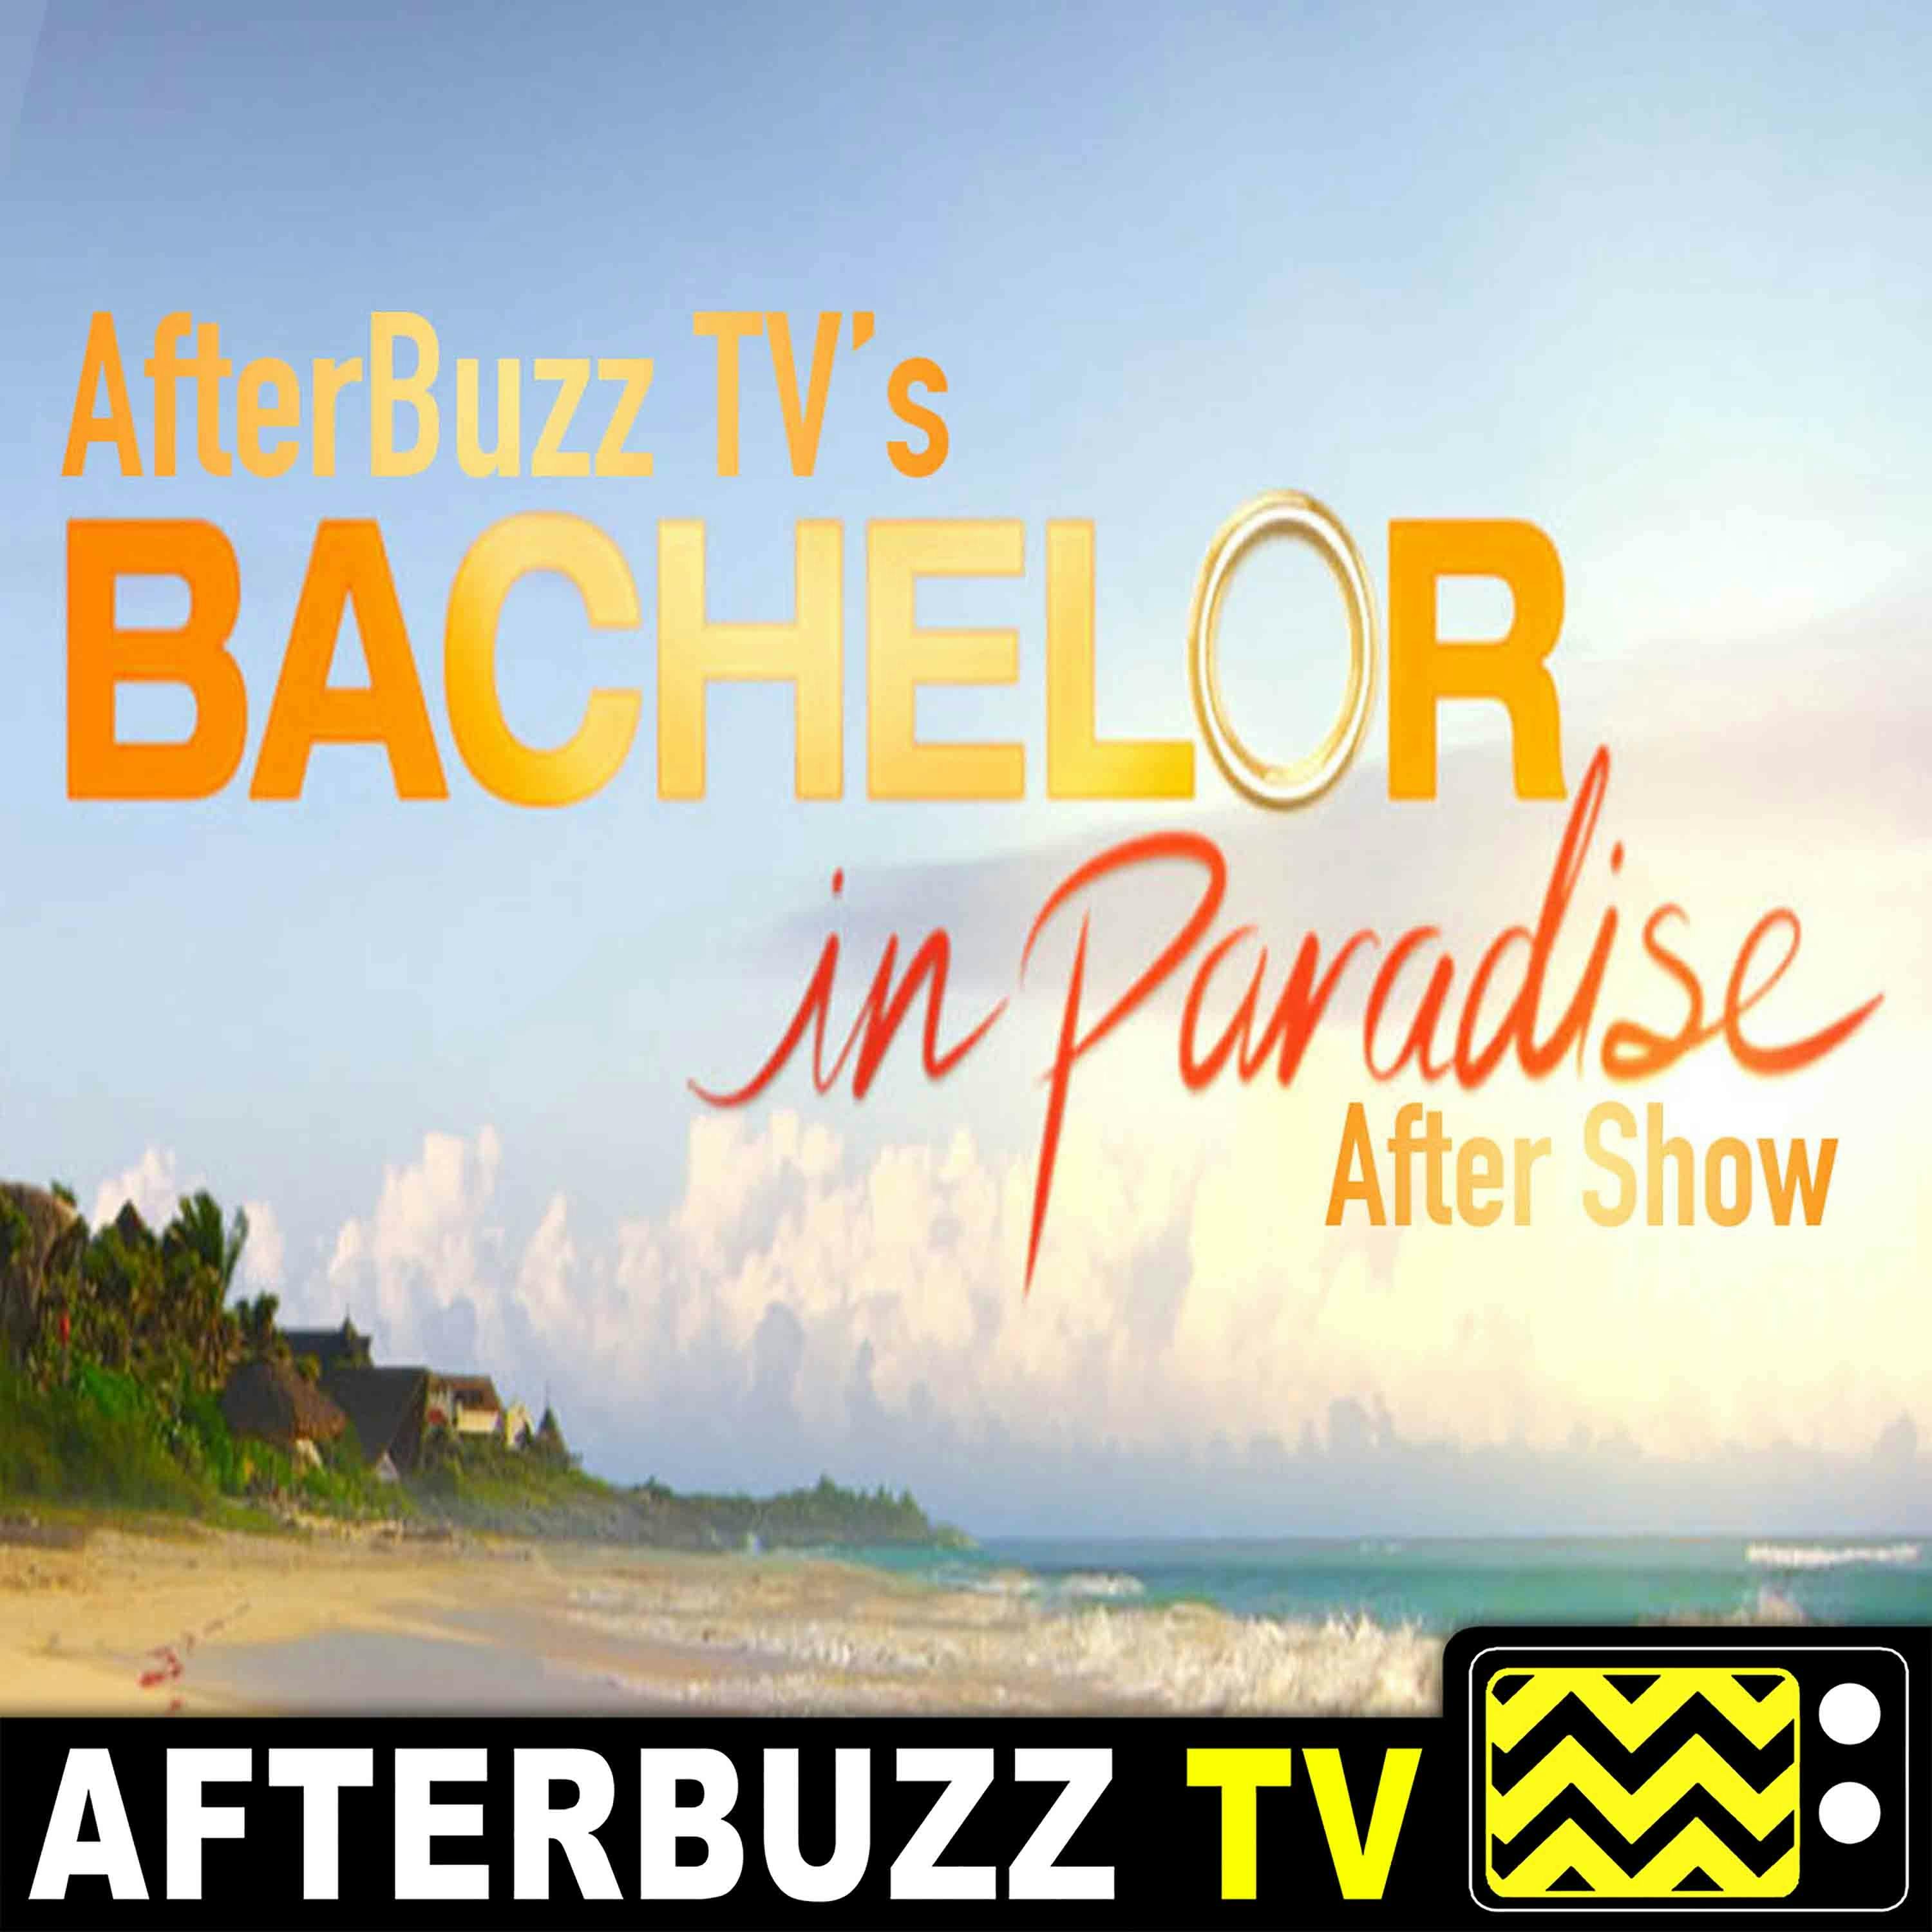 Bachelor In Paradise S:5 | Episodes 10 & 11 | AfterBuzz TV AfterShow